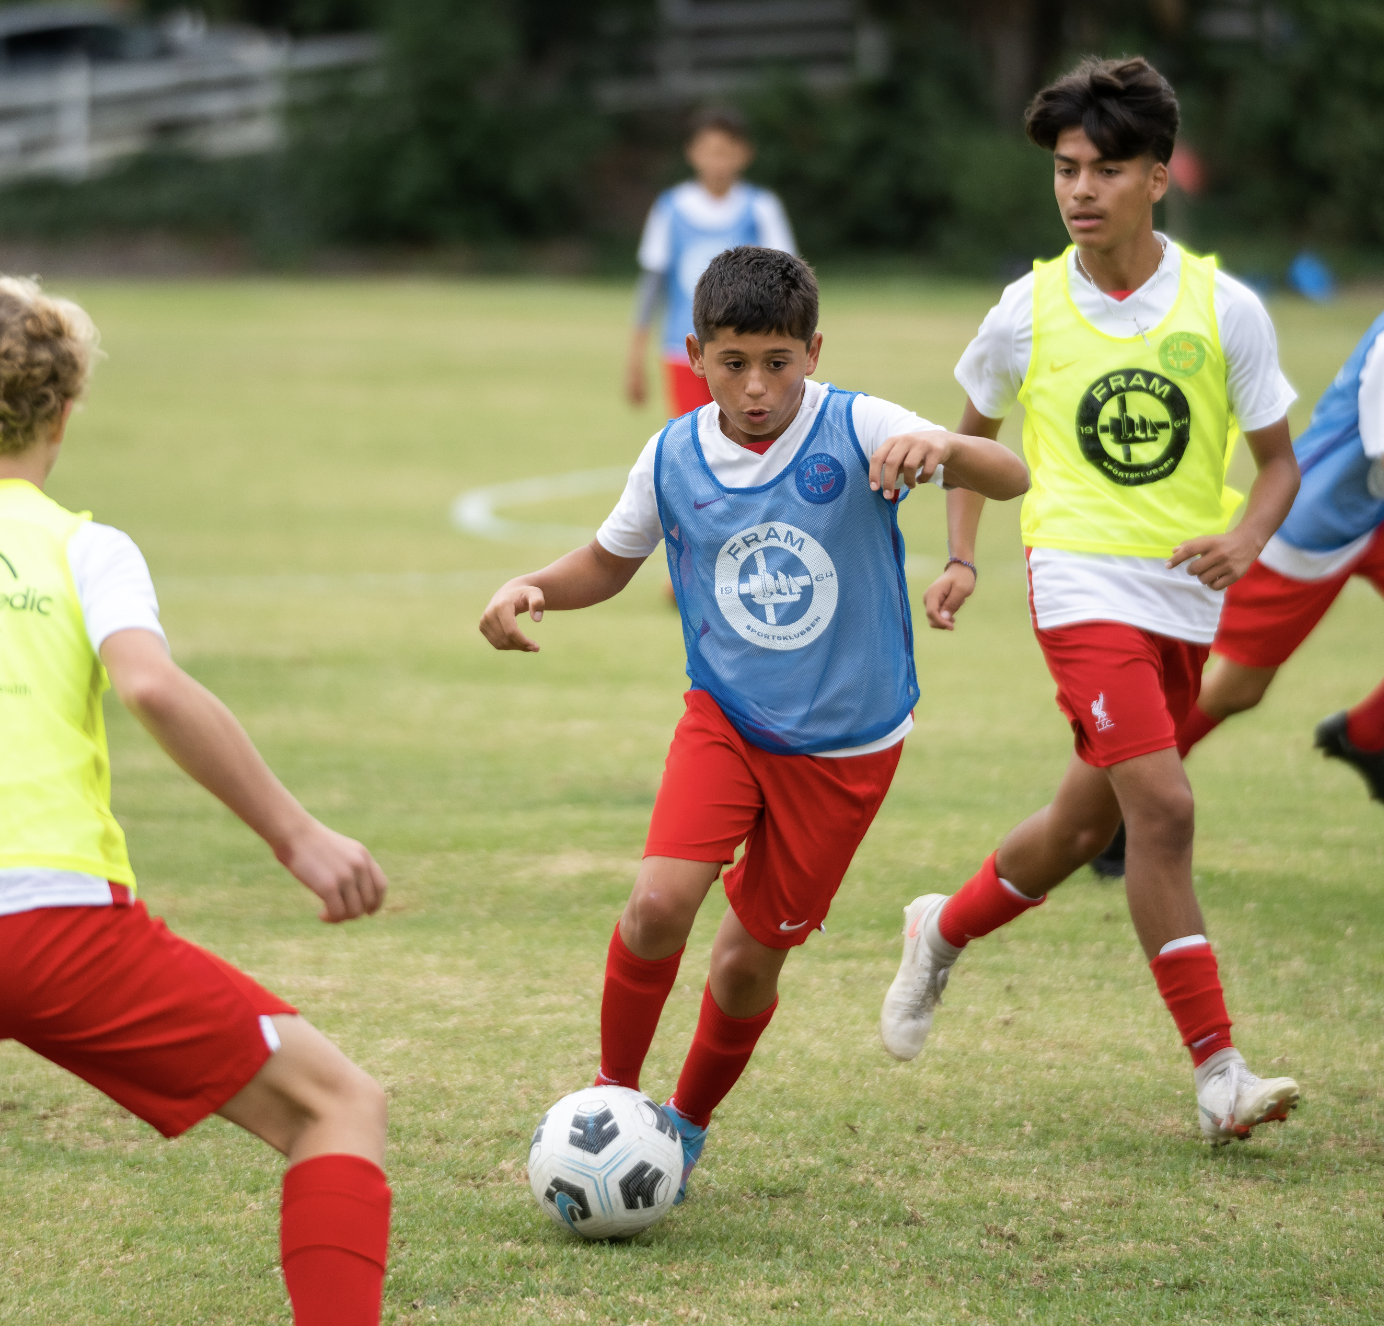 5 Common Kids Sports Related Injuries – And How To Treat Them